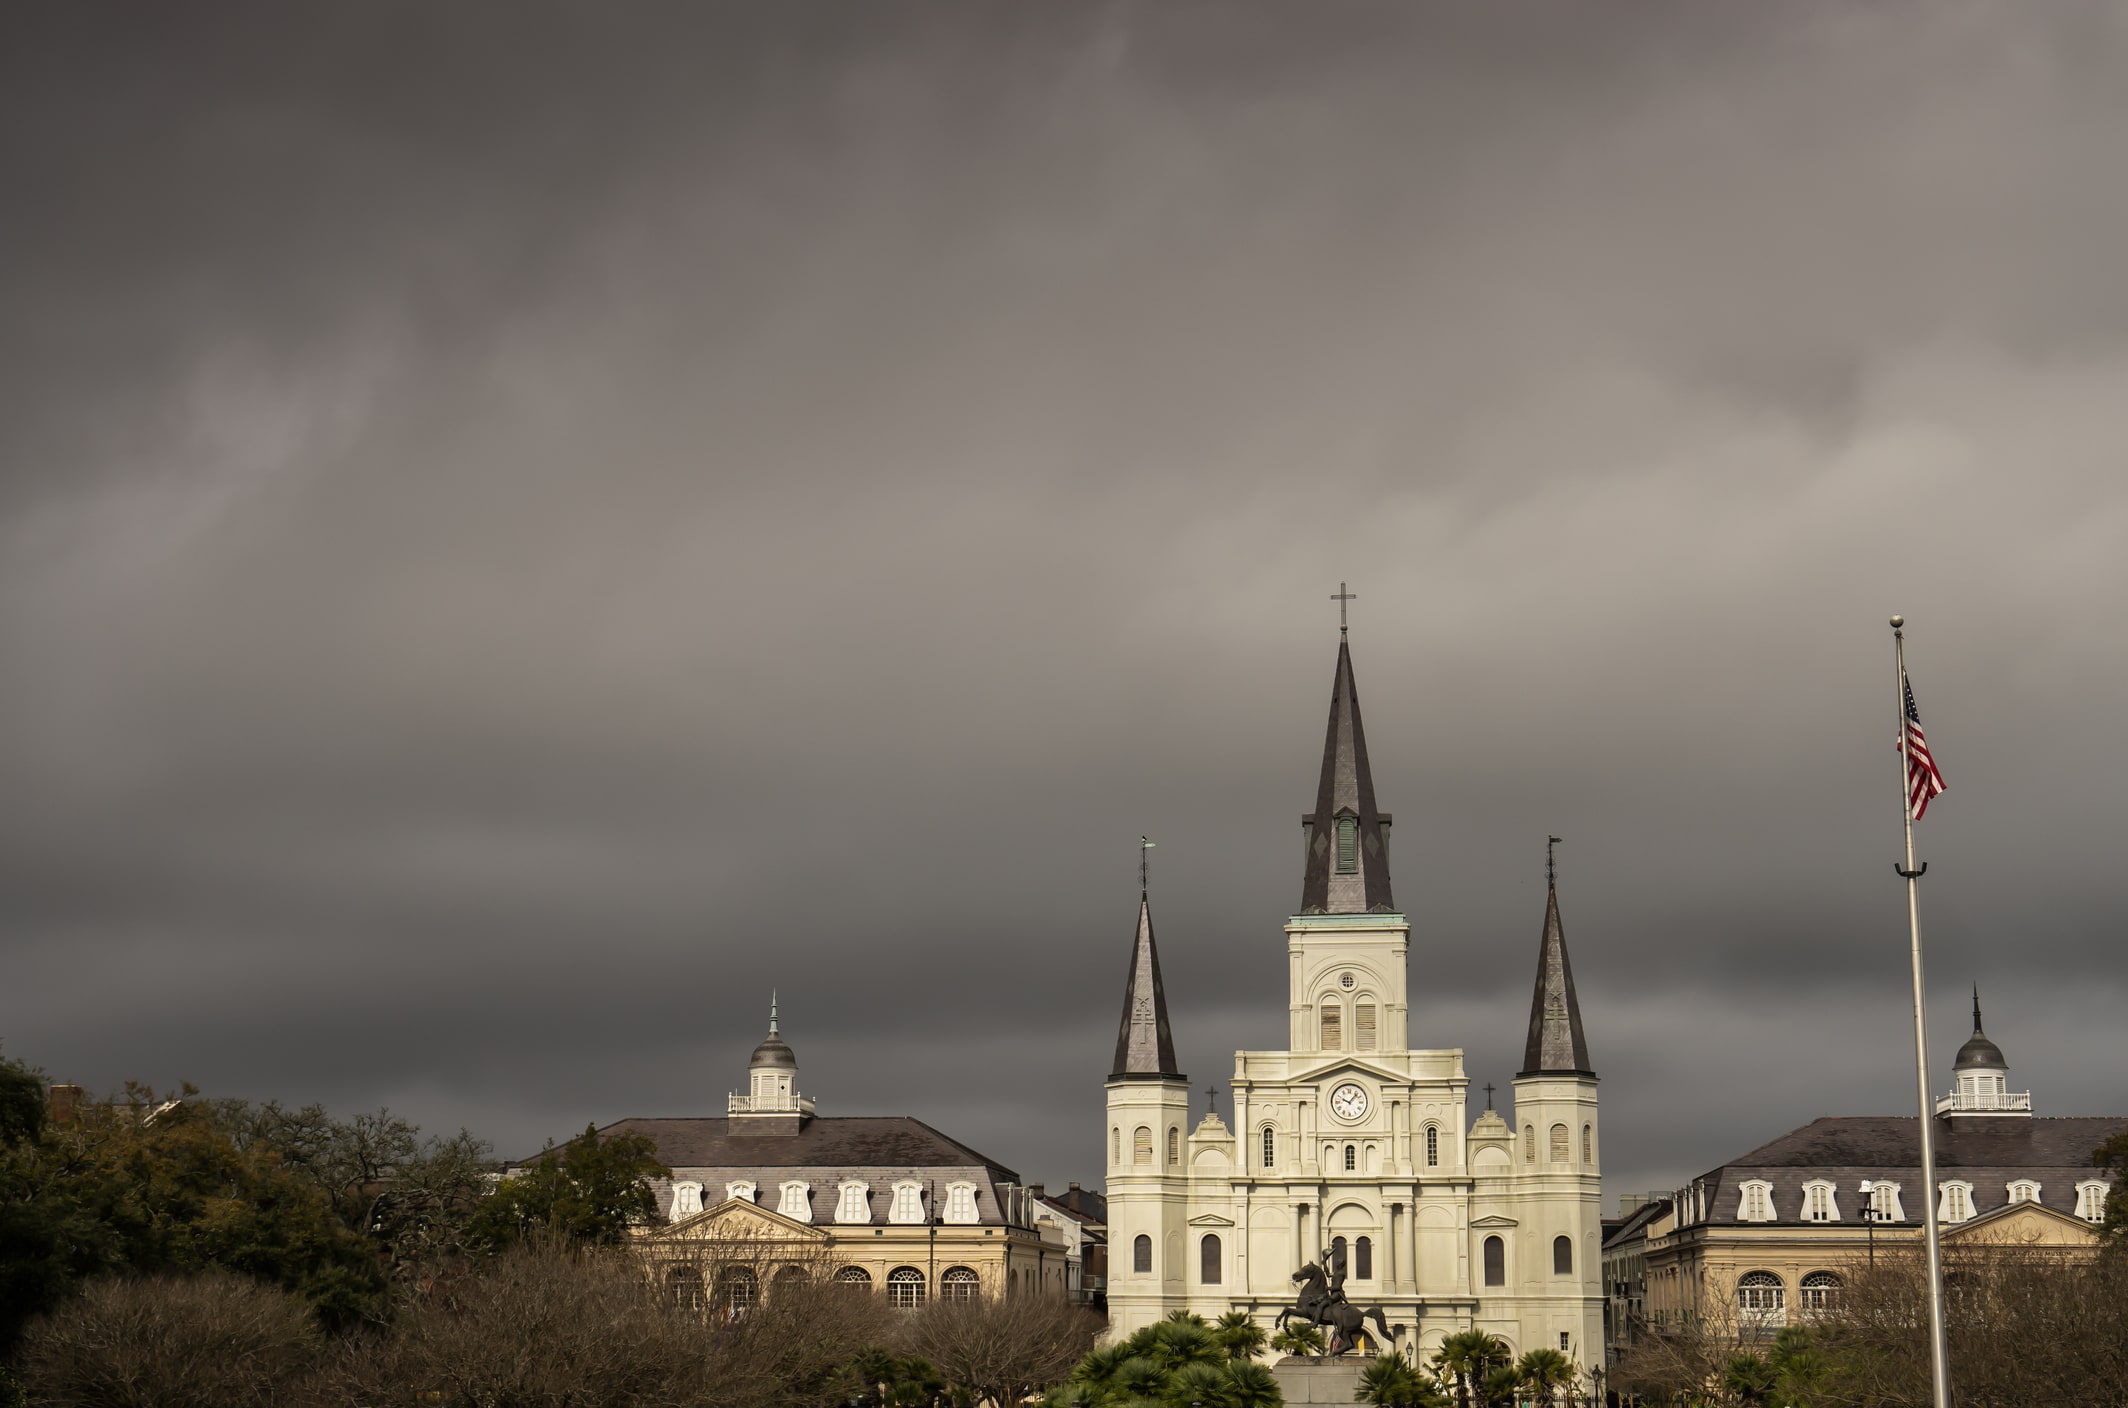 February 2020 Dark storm clouds linger over Jackson square in New Orleans weeks before coronavirus outbreak hits the city.